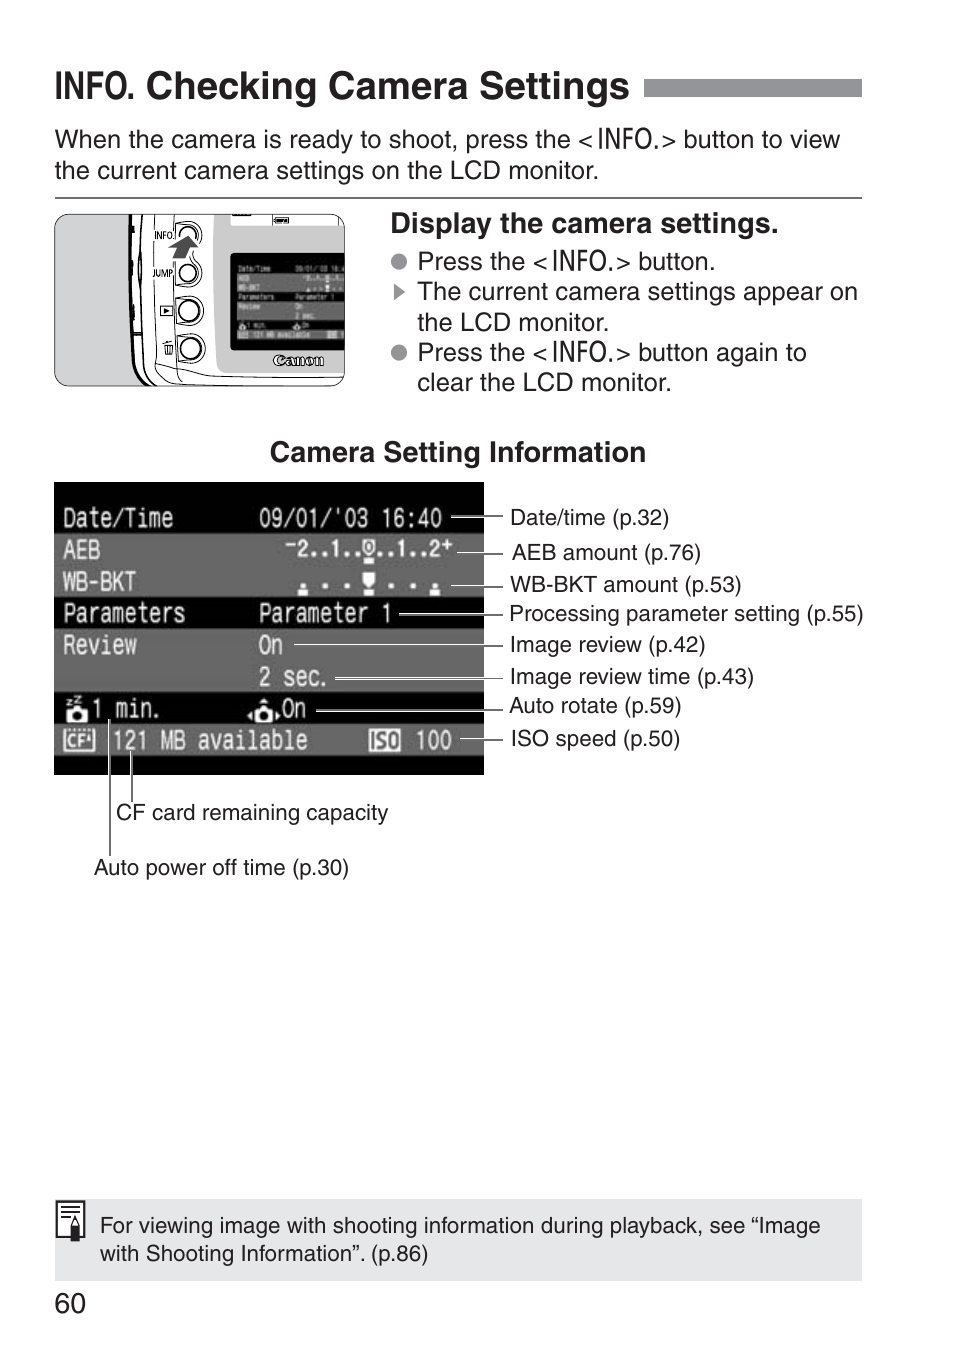 Info. checking camera settings | Canon ds6041 User Manual | Page 60 / 140